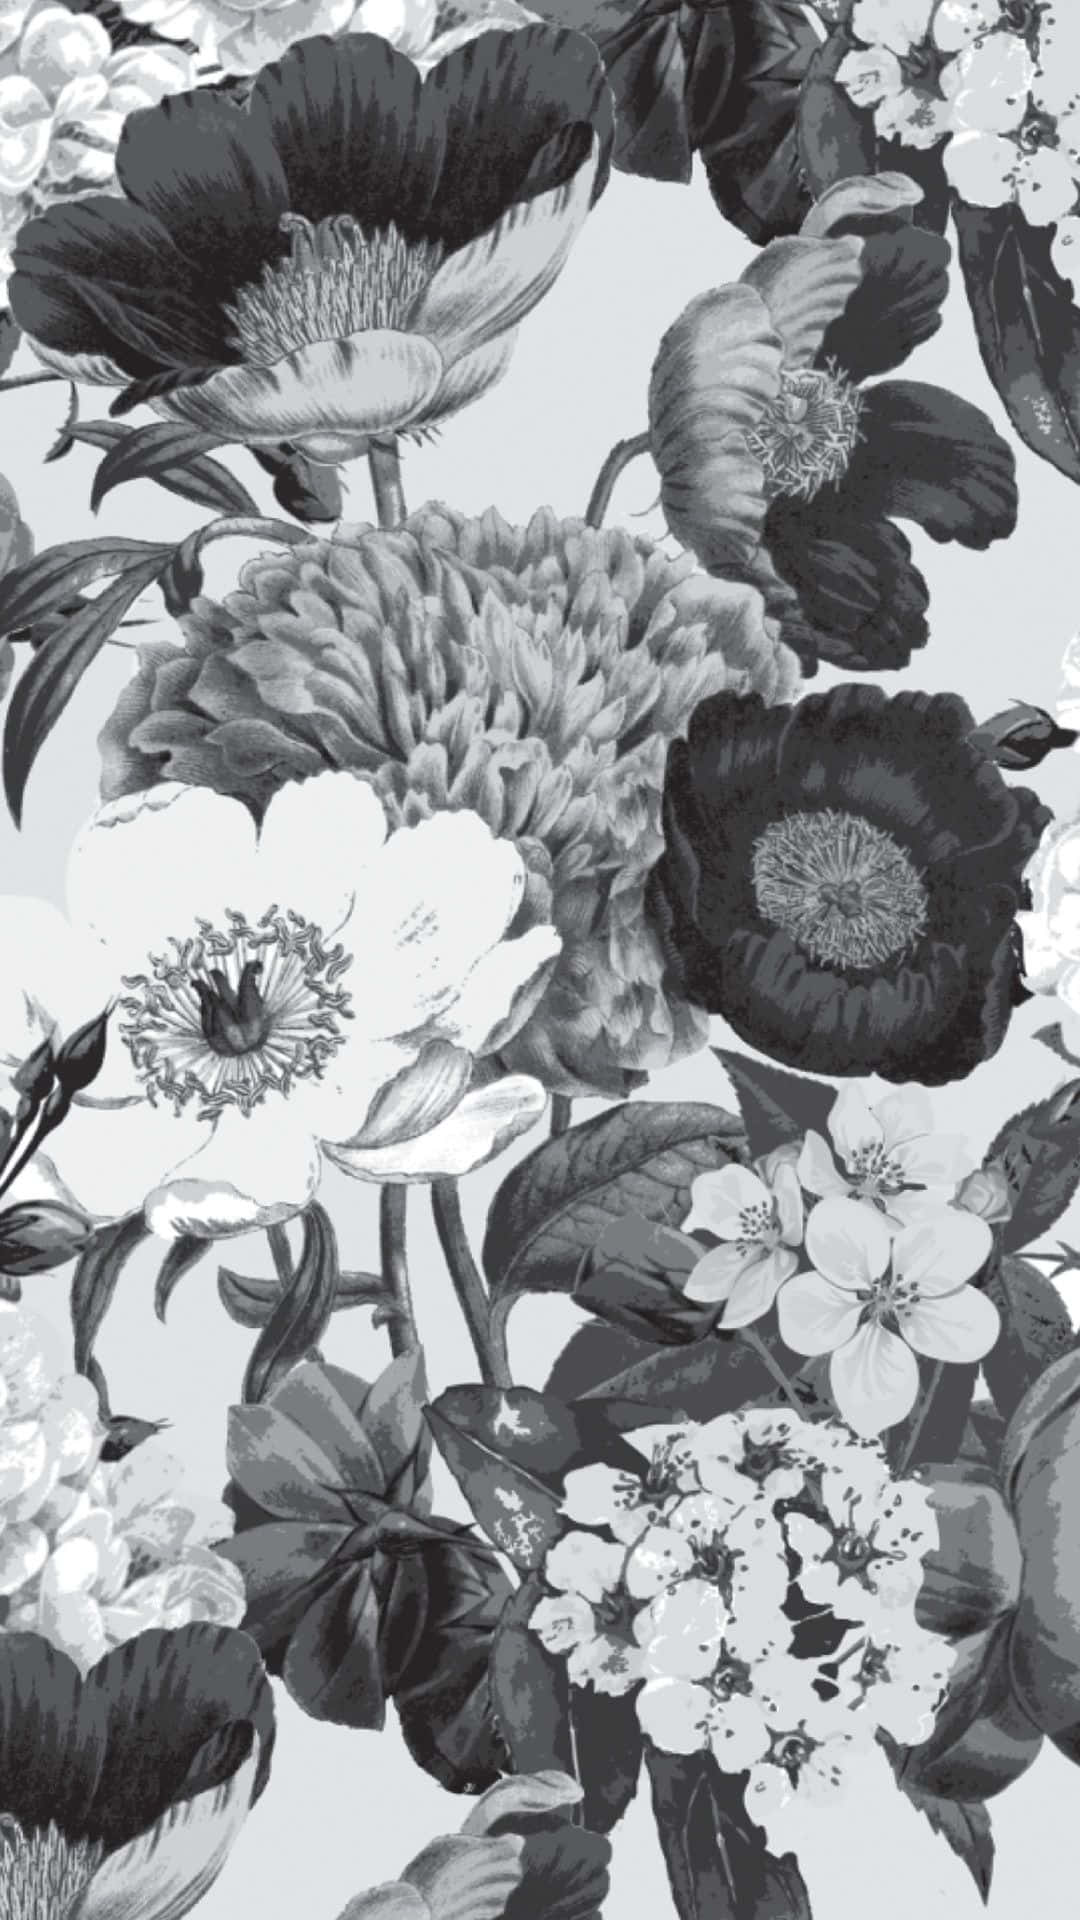 A beautiful black and white flower for your iPhone Wallpaper